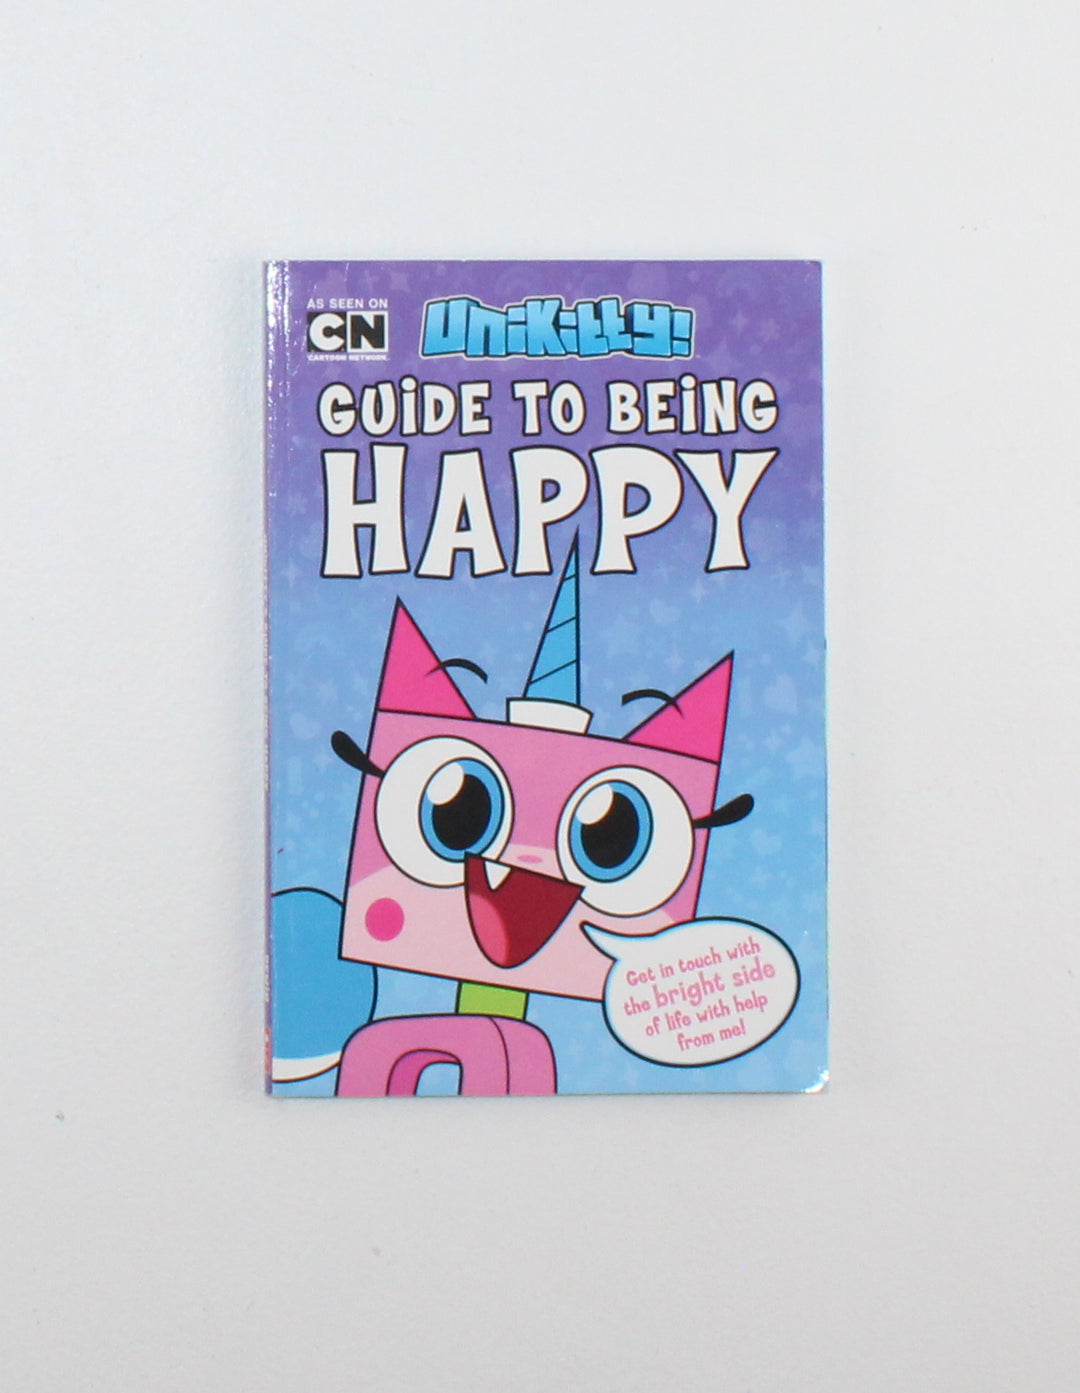 UNIKITTY GUIDE TO BEING HAPPY BOOK EUC